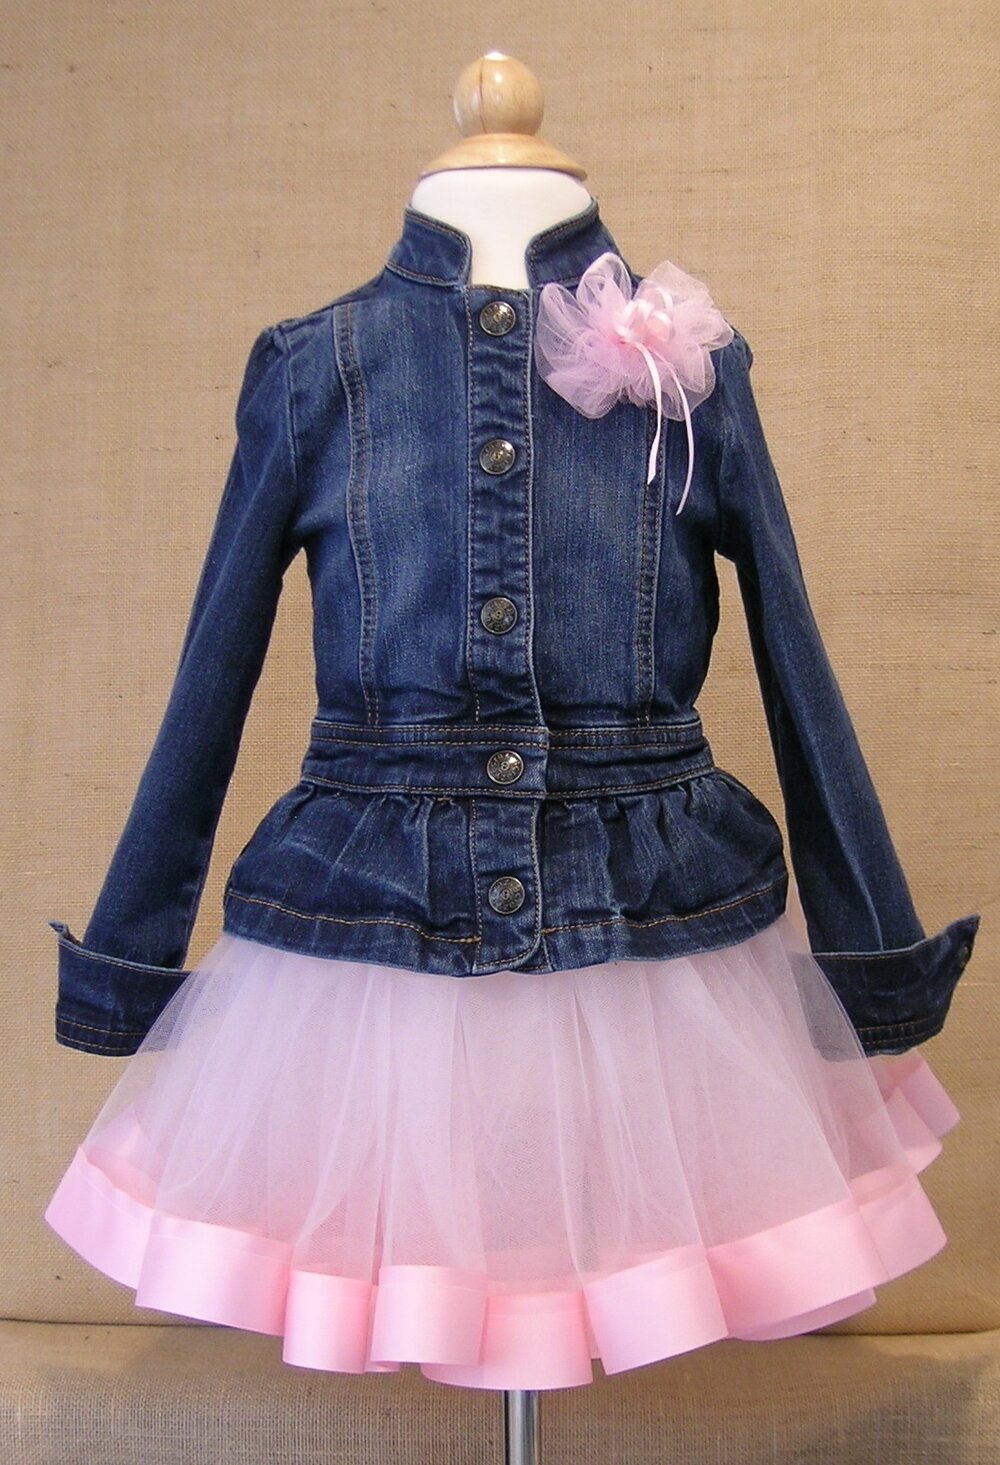 Ballerina Jean Jacket and Tutu, One Of A Kind Jean Jacket and Pink Tutu —